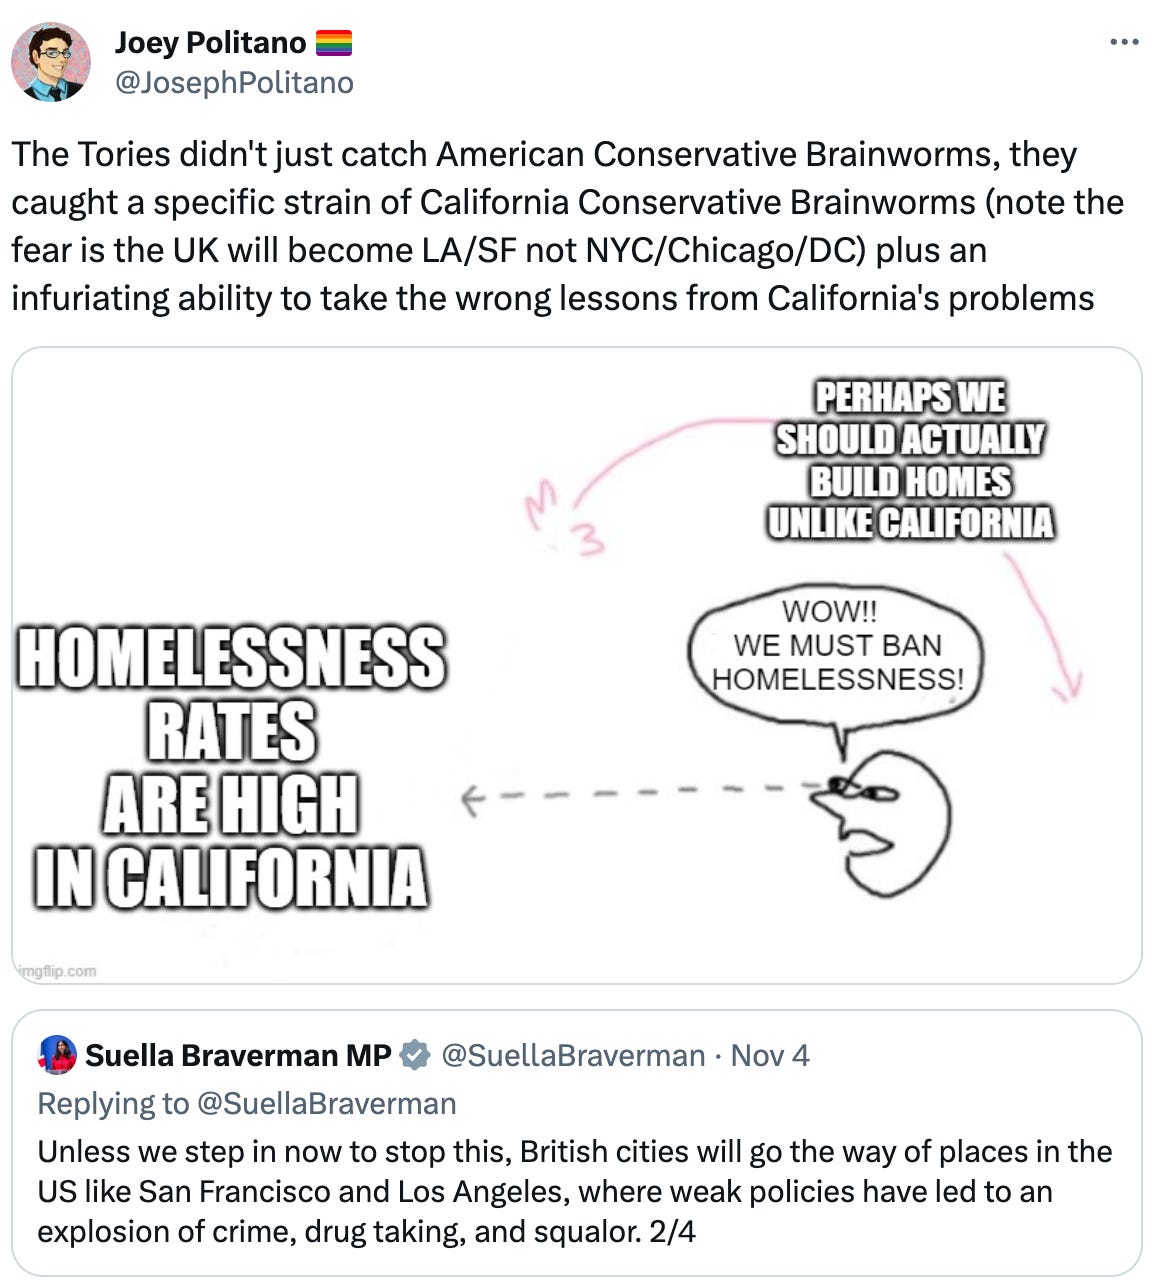  Joey Politano 🏳️‍🌈 @JosephPolitano The Tories didn't just catch American Conservative Brainworms, they caught a specific strain of California Conservative Brainworms (note the fear is the UK will become LA/SF not NYC/Chicago/DC) plus an infuriating ability to take the wrong lessons from California's problems Quote Suella Braverman MP @SuellaBraverman · Nov 4 Replying to @SuellaBraverman Unless we step in now to stop this, British cities will go the way of places in the US like San Francisco and Los Angeles, where weak policies have led to an explosion of crime, drug taking, and squalor. 2/4